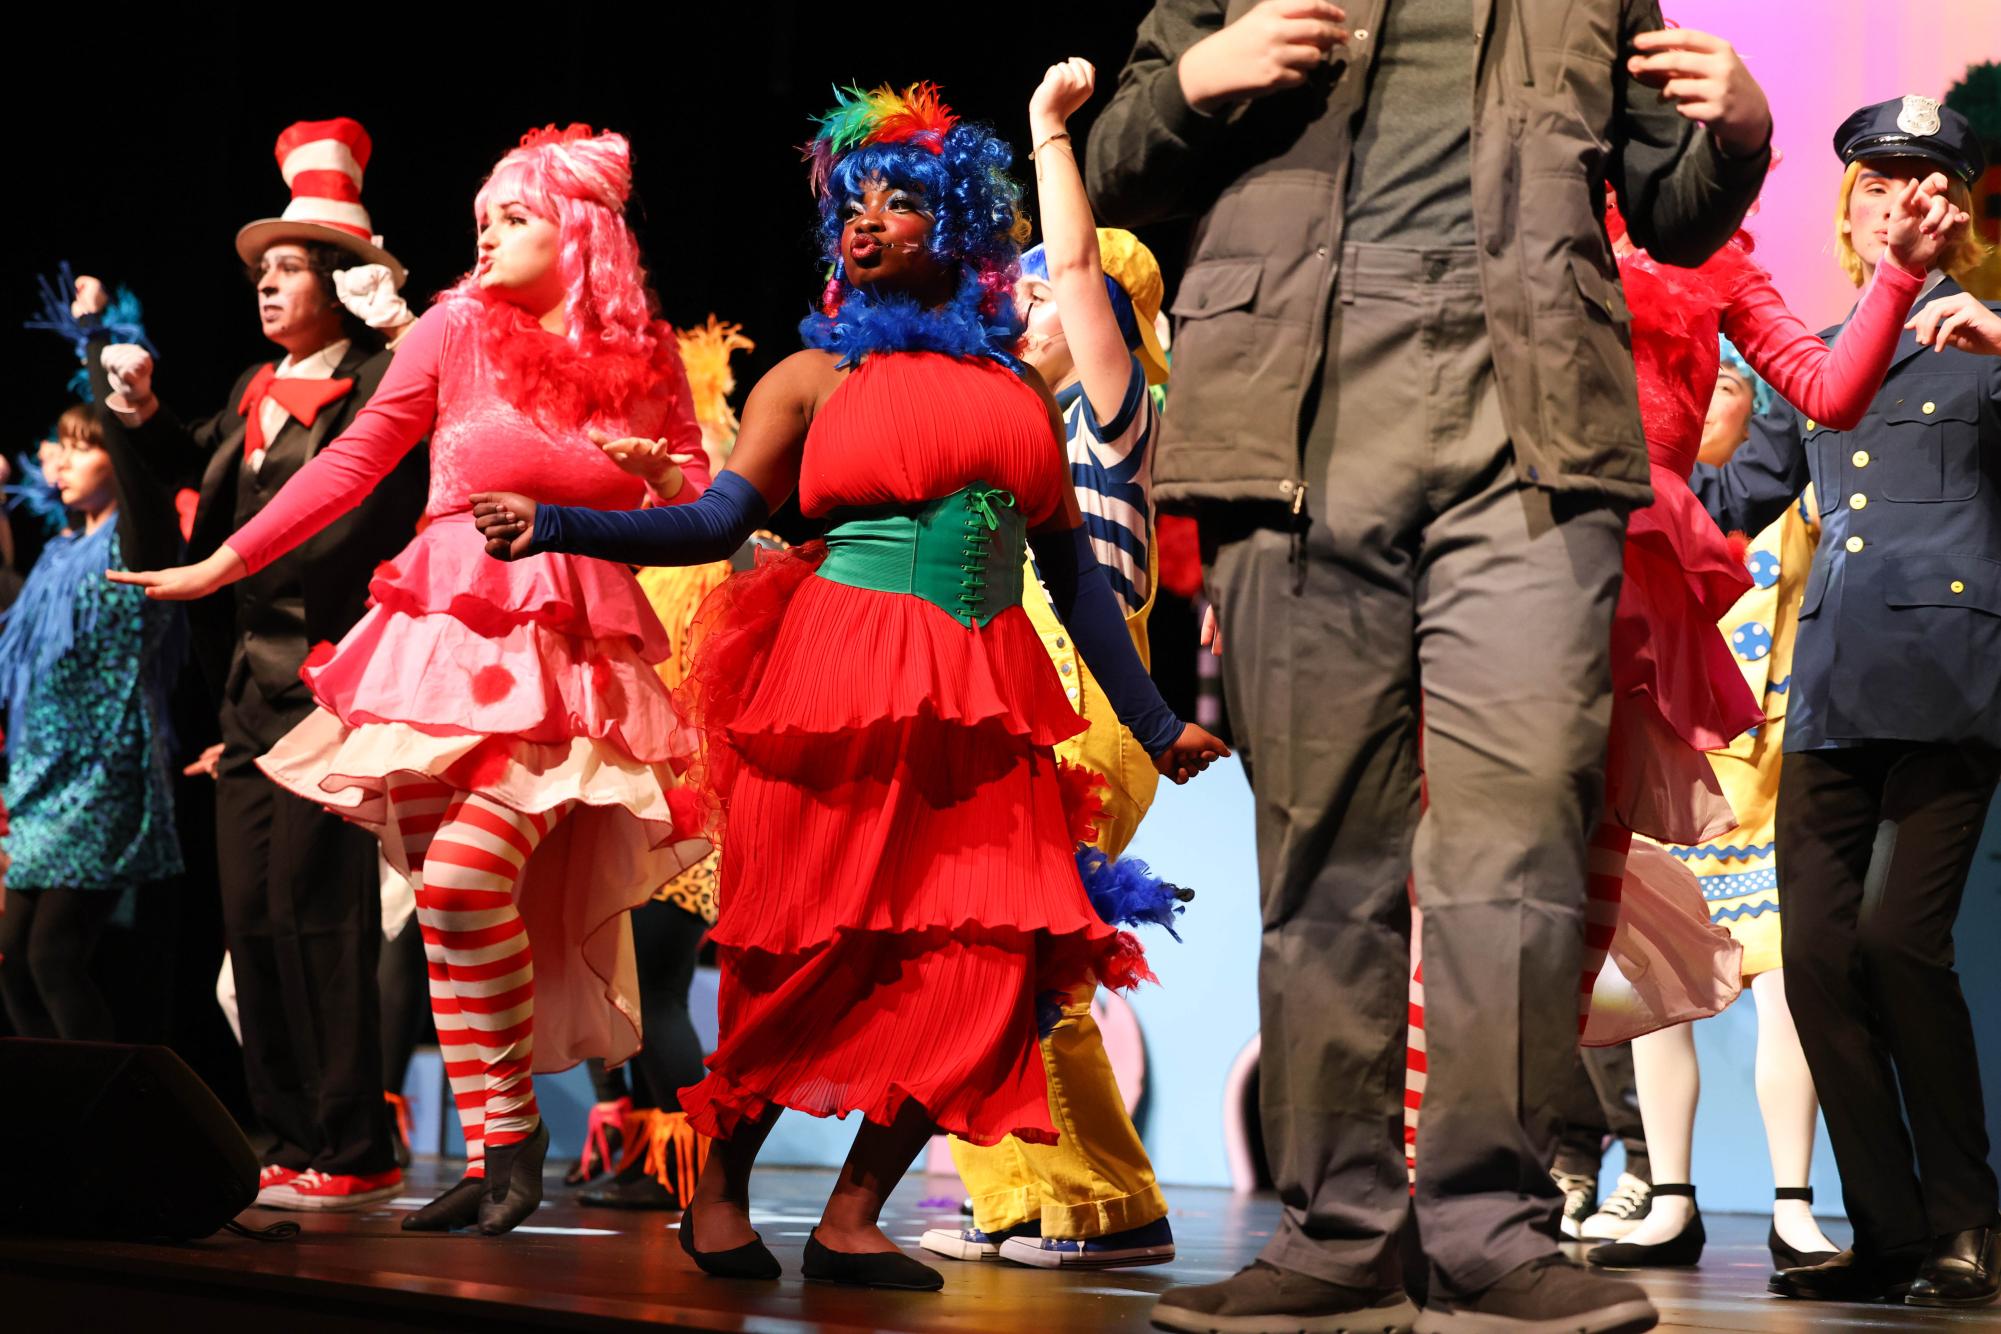 To the beat, Elizabeth Fasesimi sings and dances with the cast. Fasesimi, dressed in a bright red dress with a rainbow hair and tail, plays Mayzie the bird in Seussical the Musical. Mayzie sings many songs troughout the Musical, such as How Lucky You Are and the closing song Green Eggs and Ham.